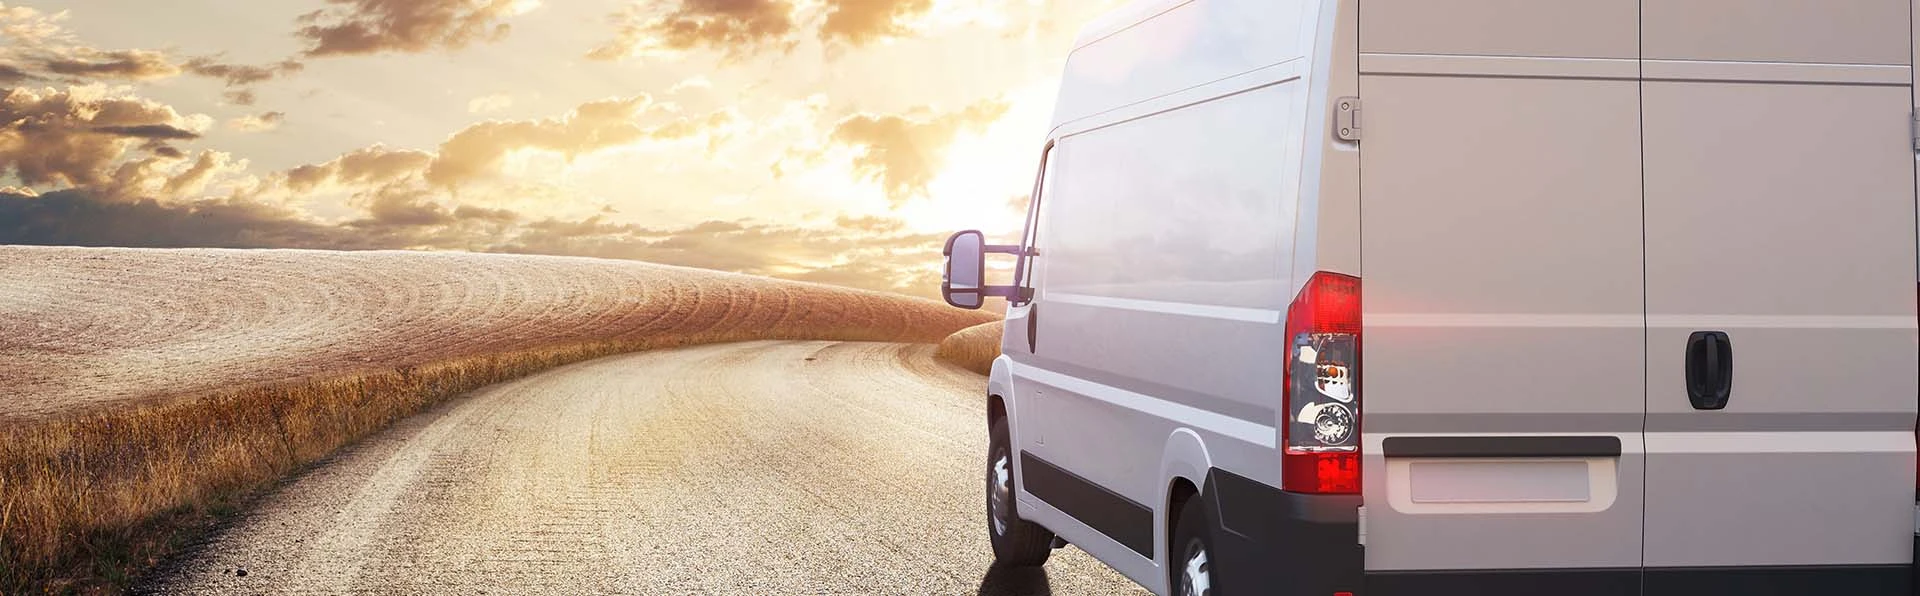 Leasing a Van in 2023: The Benefits for Tradespeople